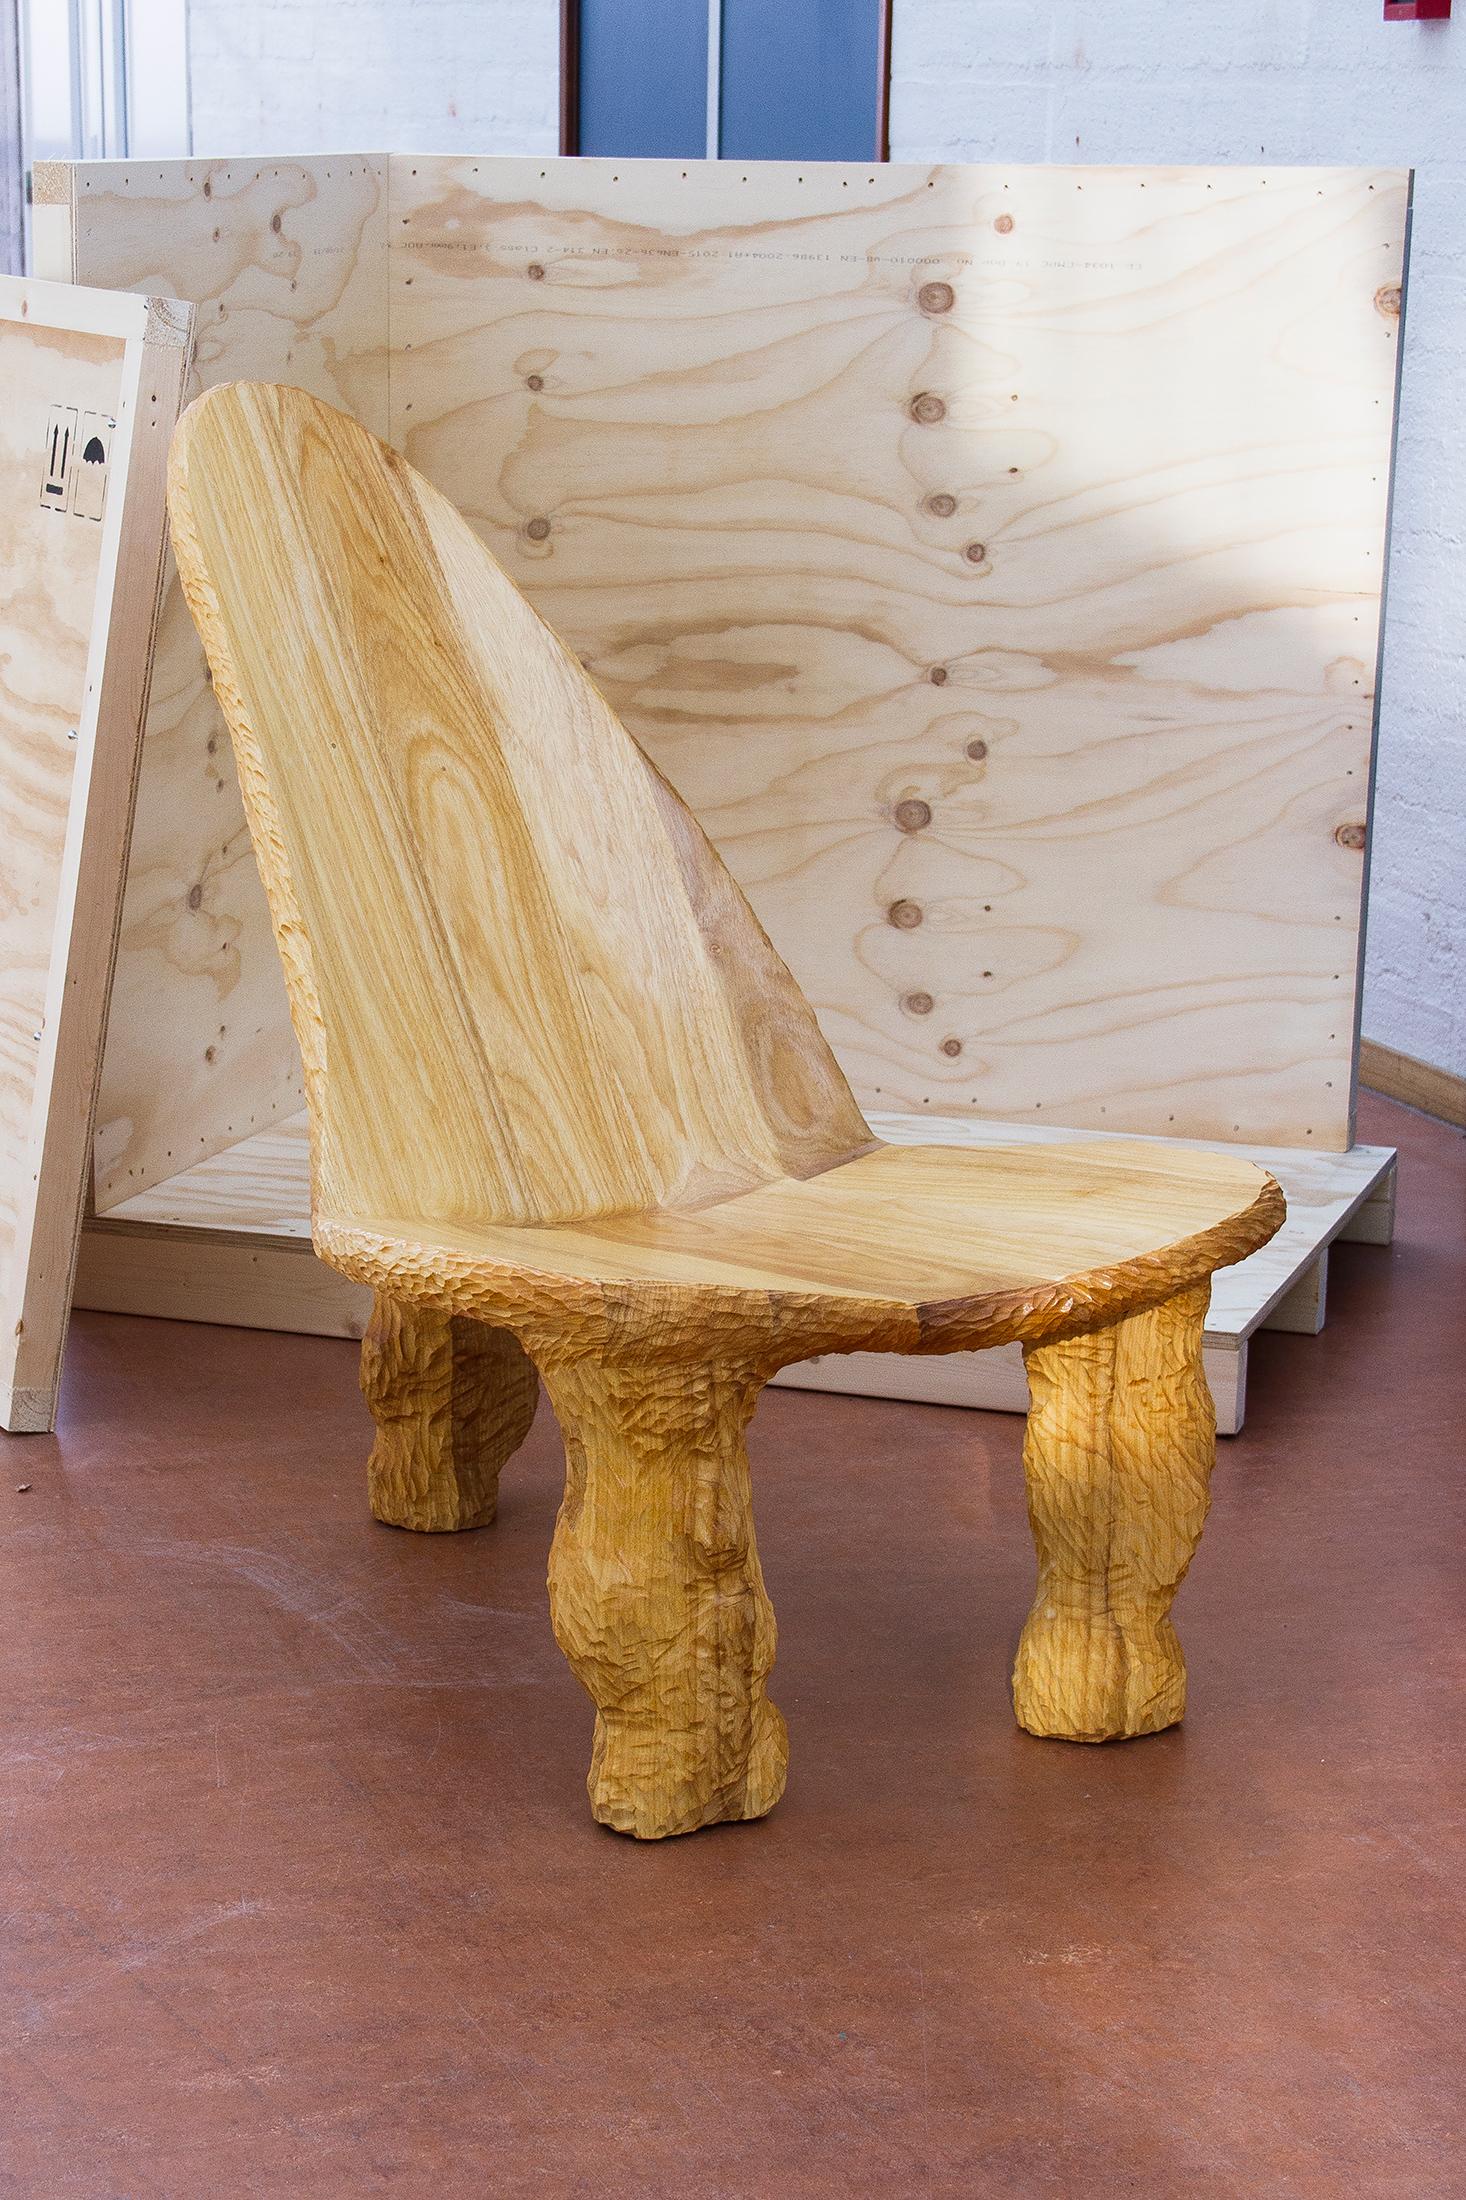 Here is the Hand-Carved Wood Version of the Lounge Chair Designed and Crafted by Tellurico Design Studio for Emma Scully Gallery.

Customization: 
If asked beforehand, the Lounge Chair can be customised with different kinds of wood or finishings.